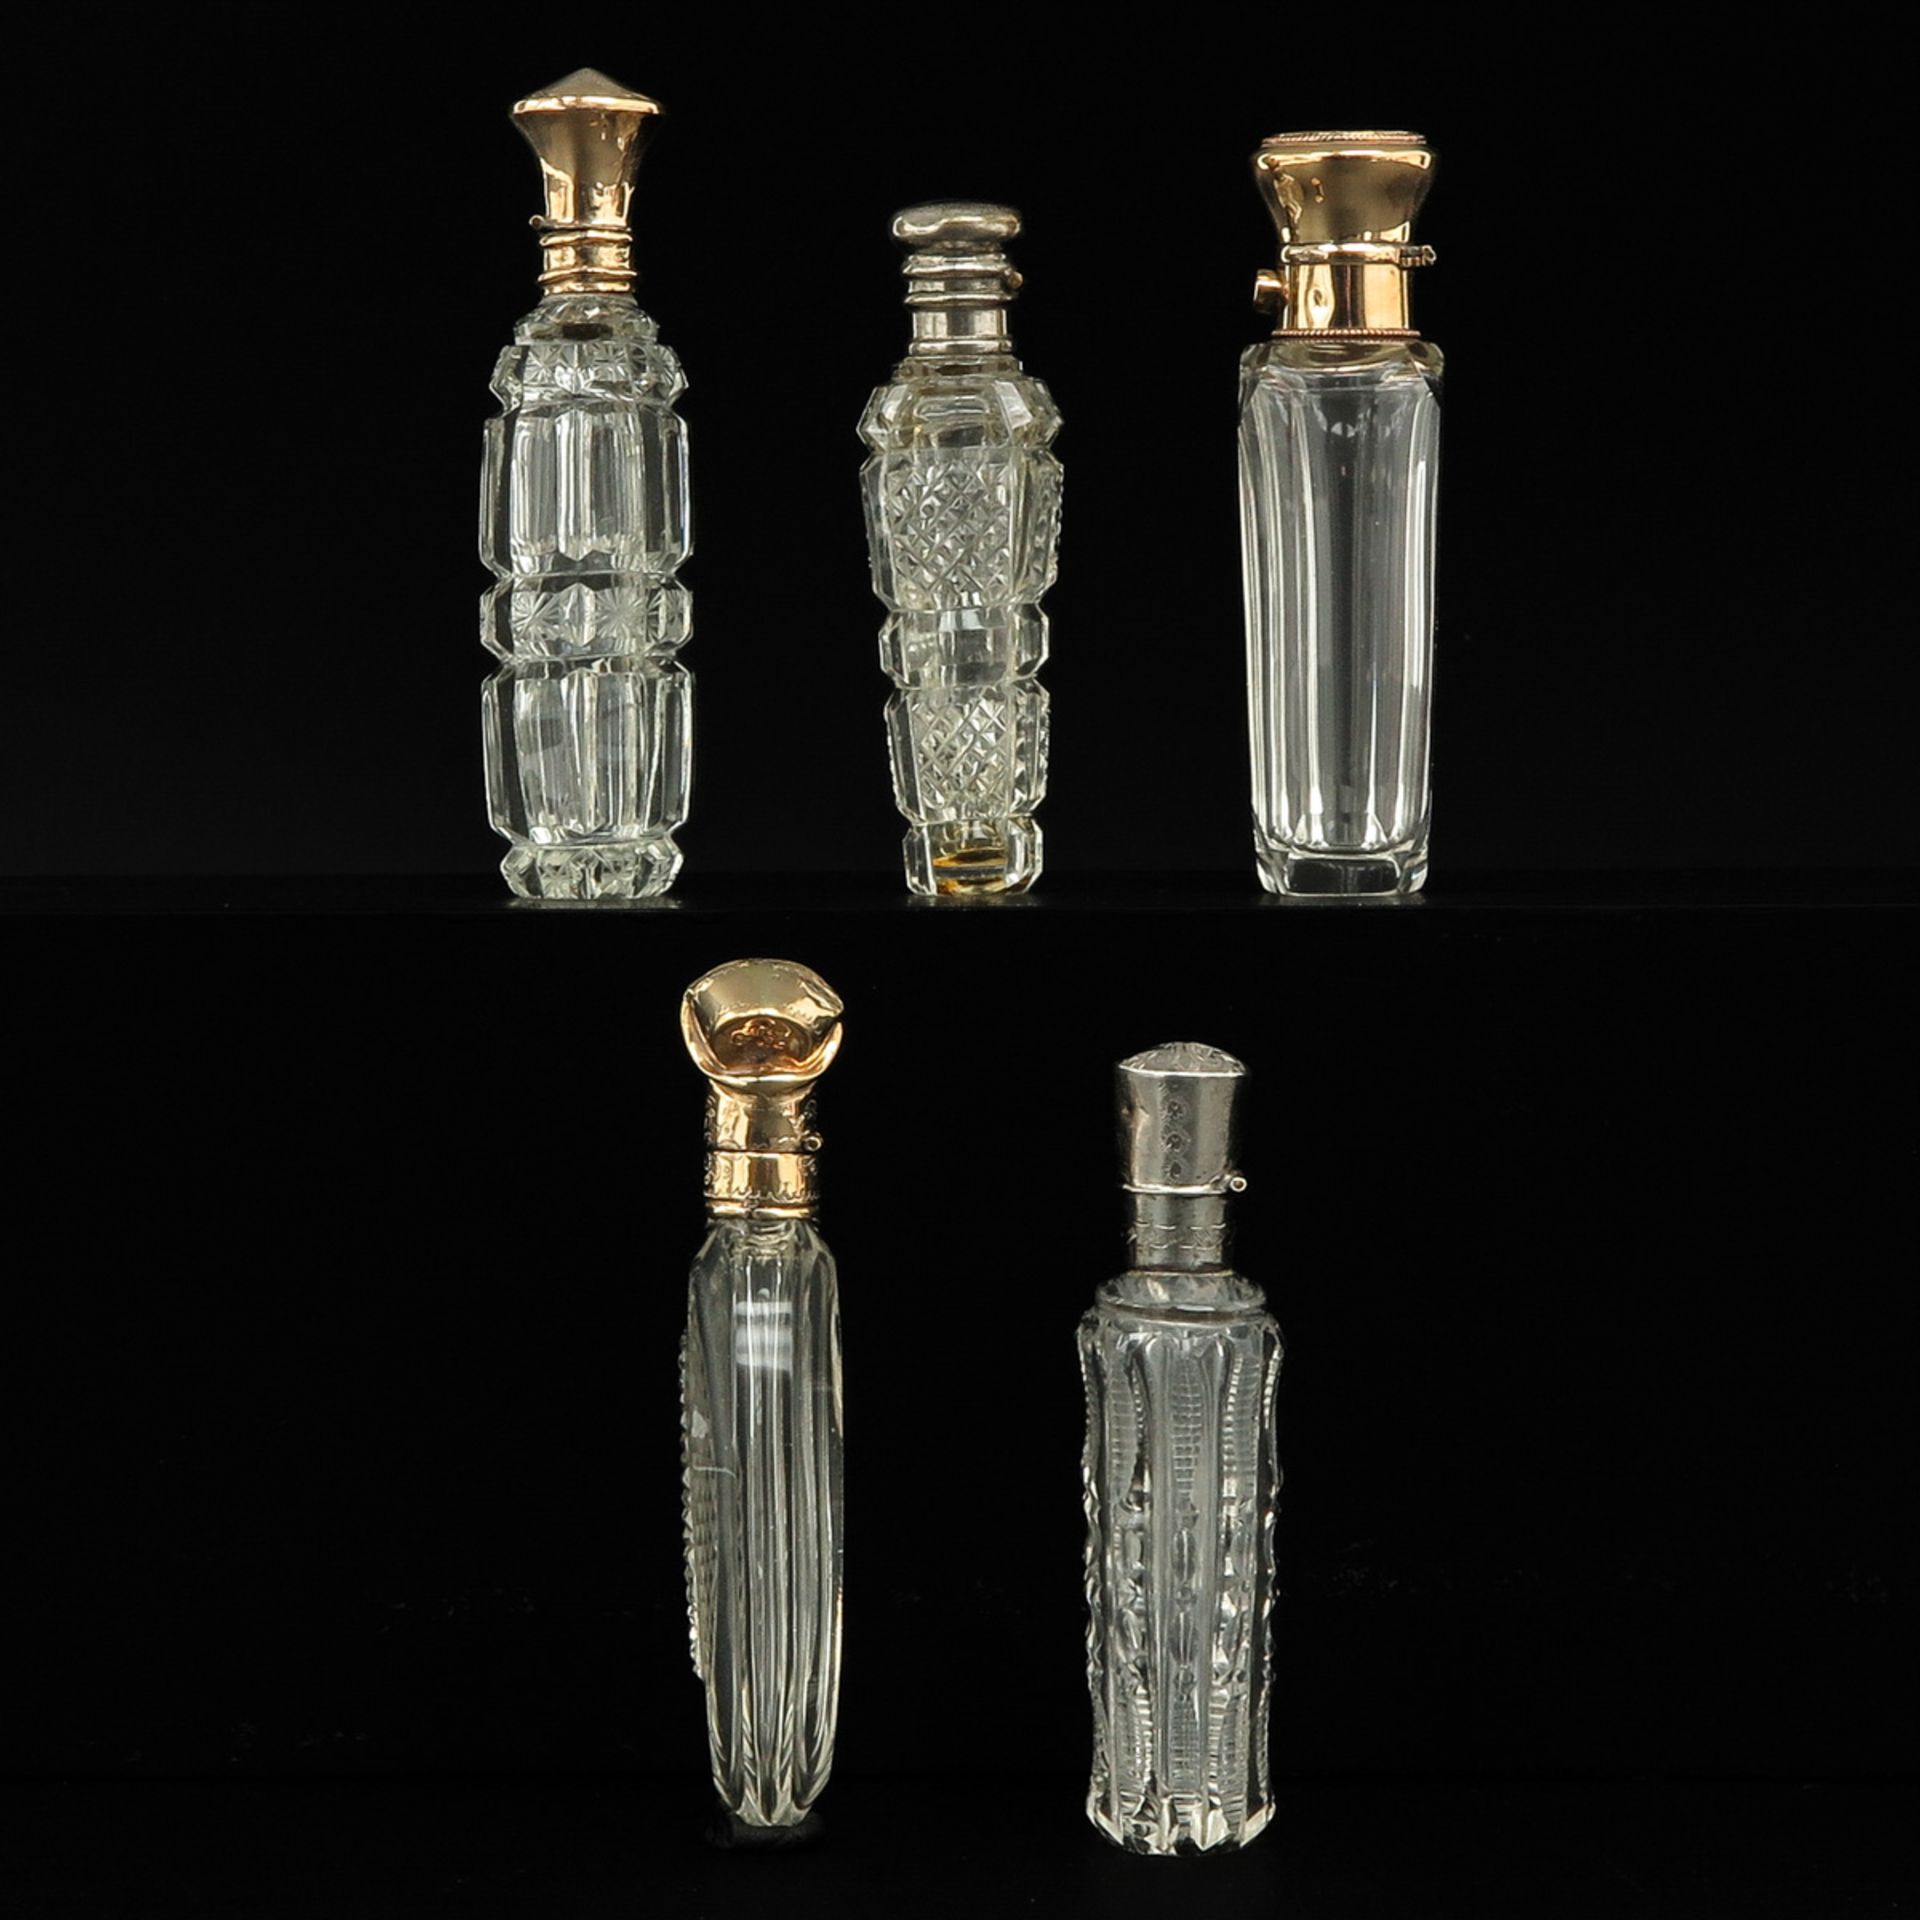 A Collection of 5 Perfume Bottles - Image 2 of 9